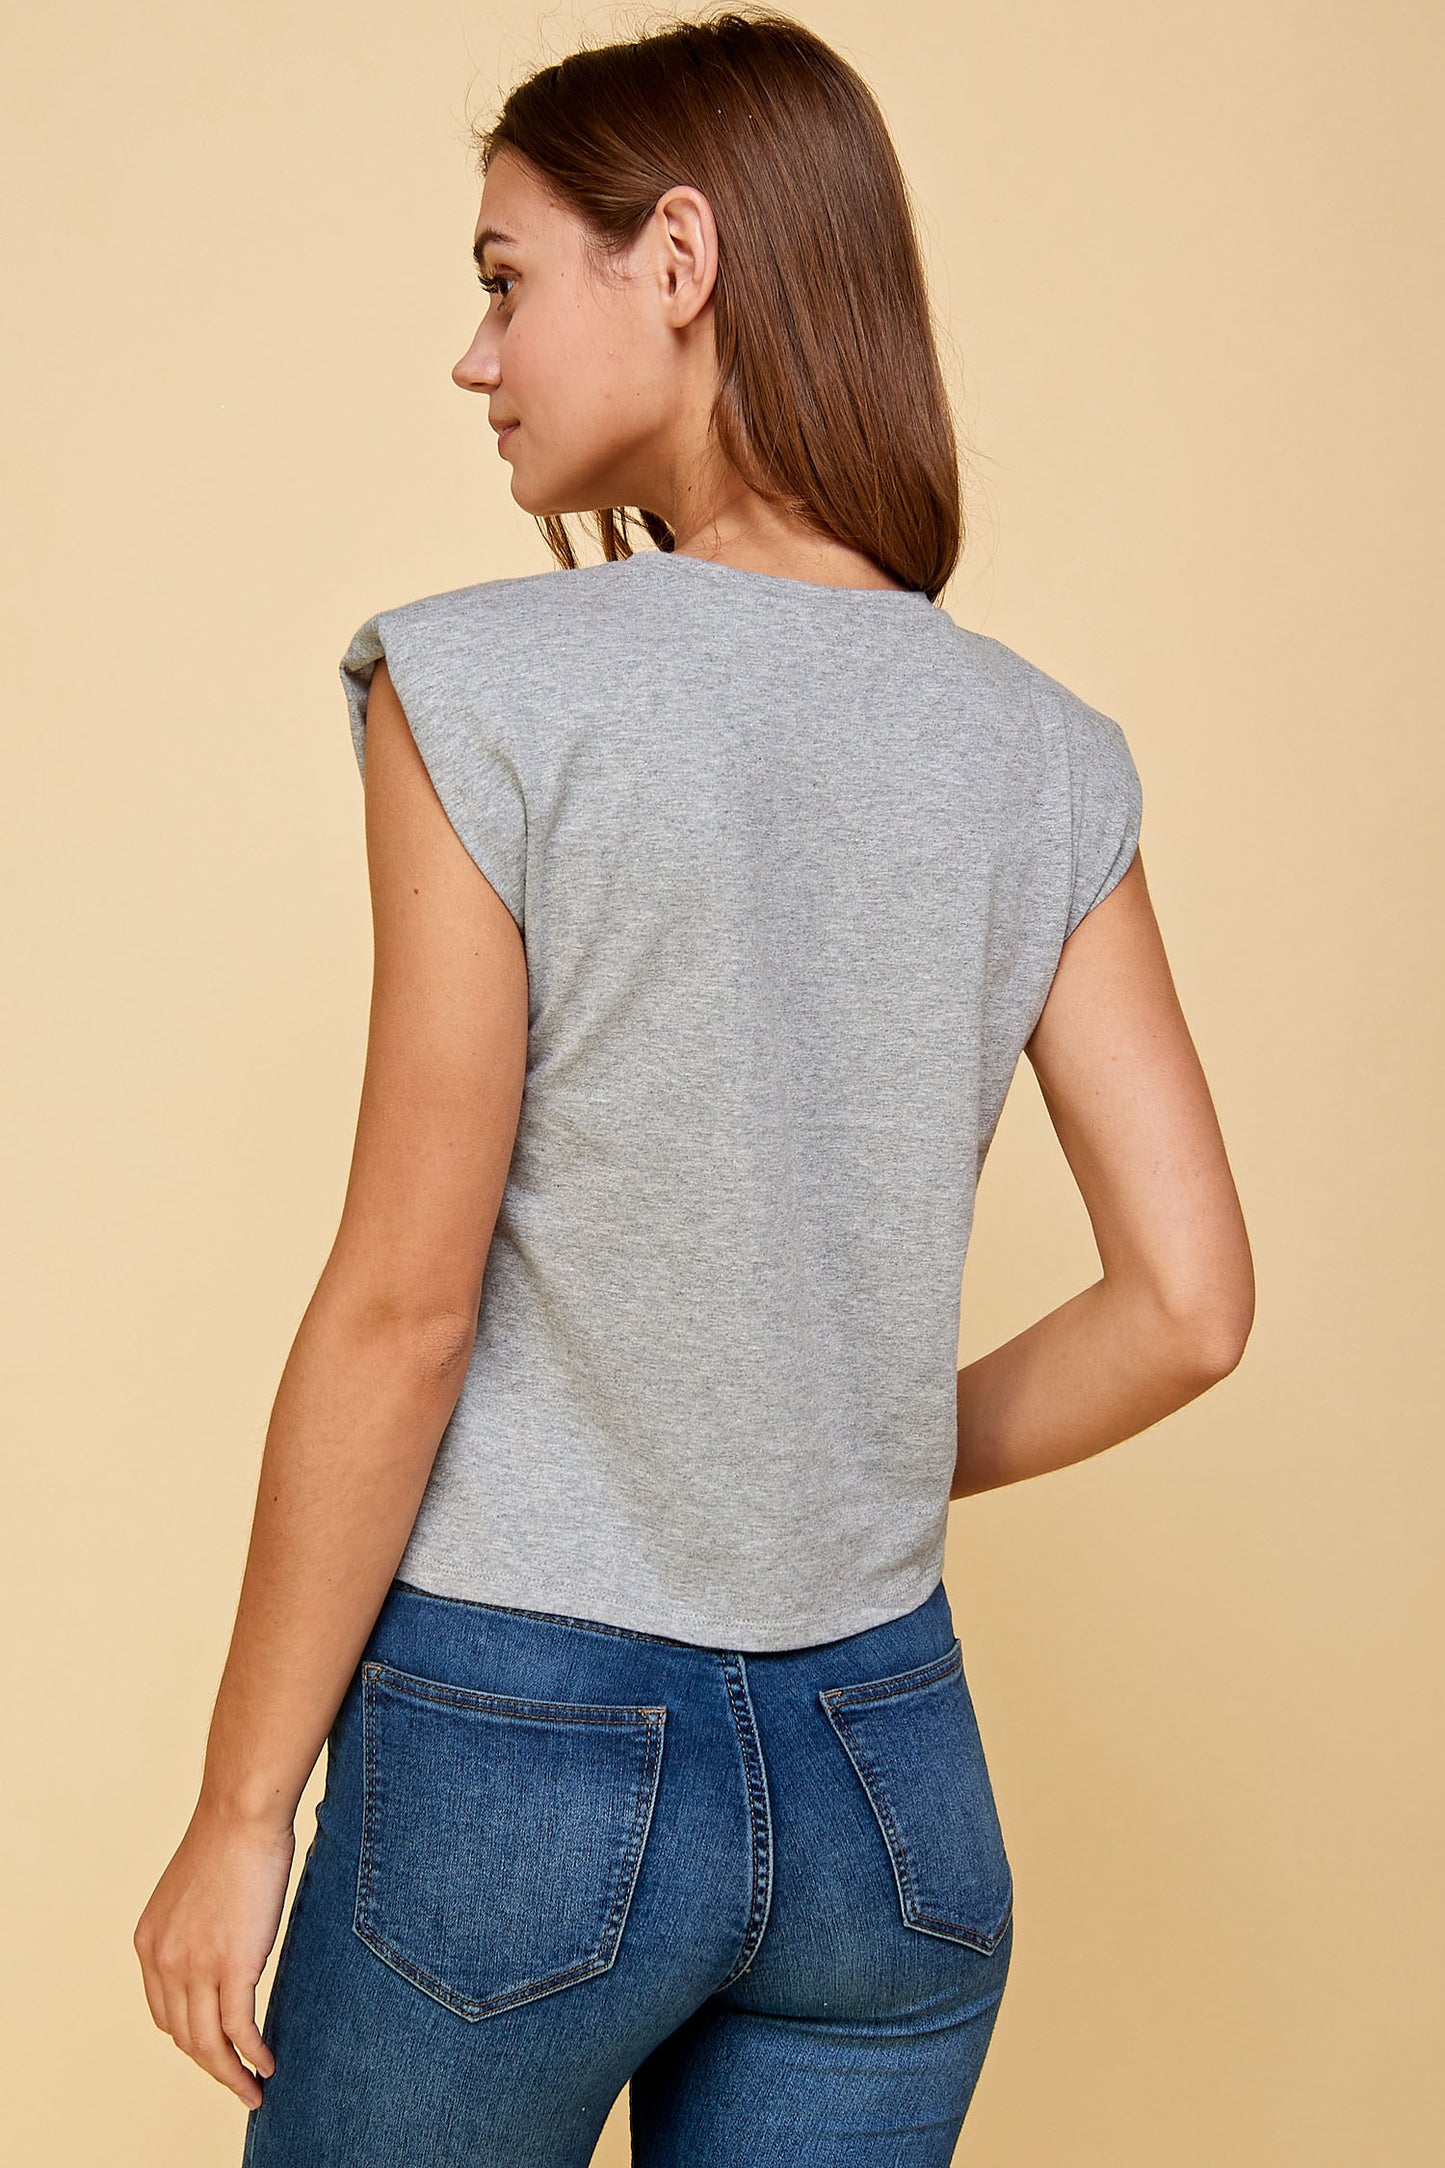 GREY MUSCLE TEE WITH SHOULDER PADS